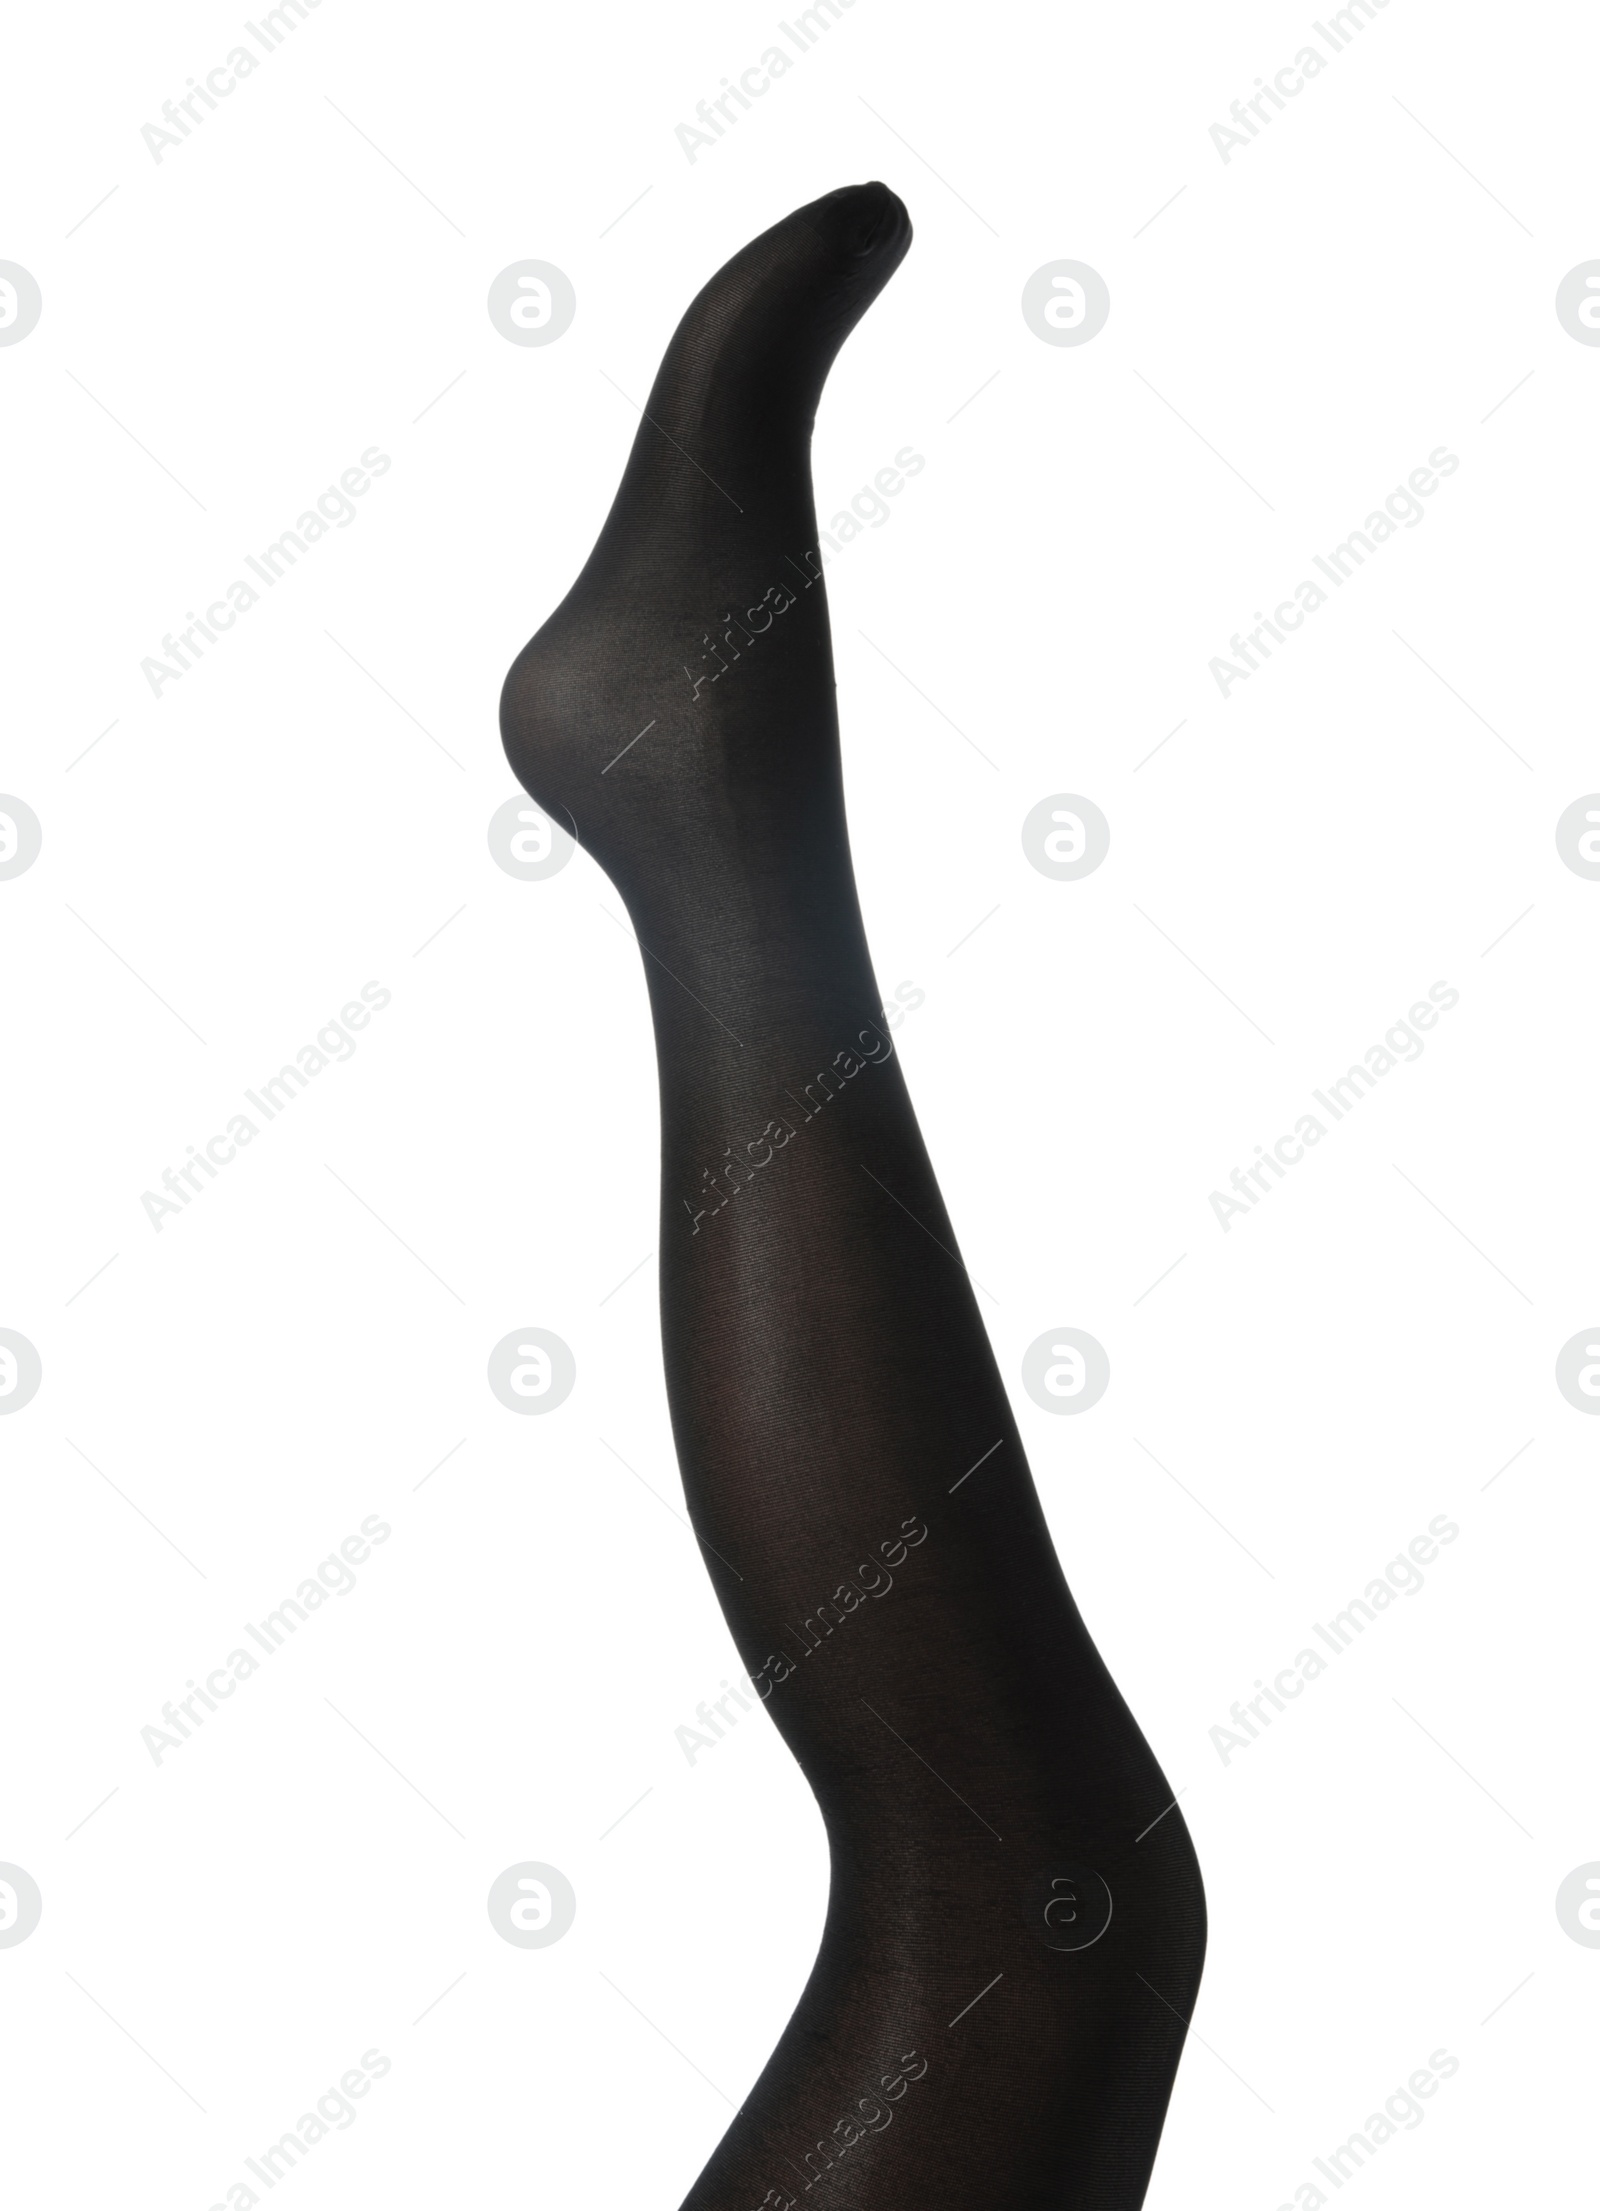 Photo of Leg mannequin in black tights on white background